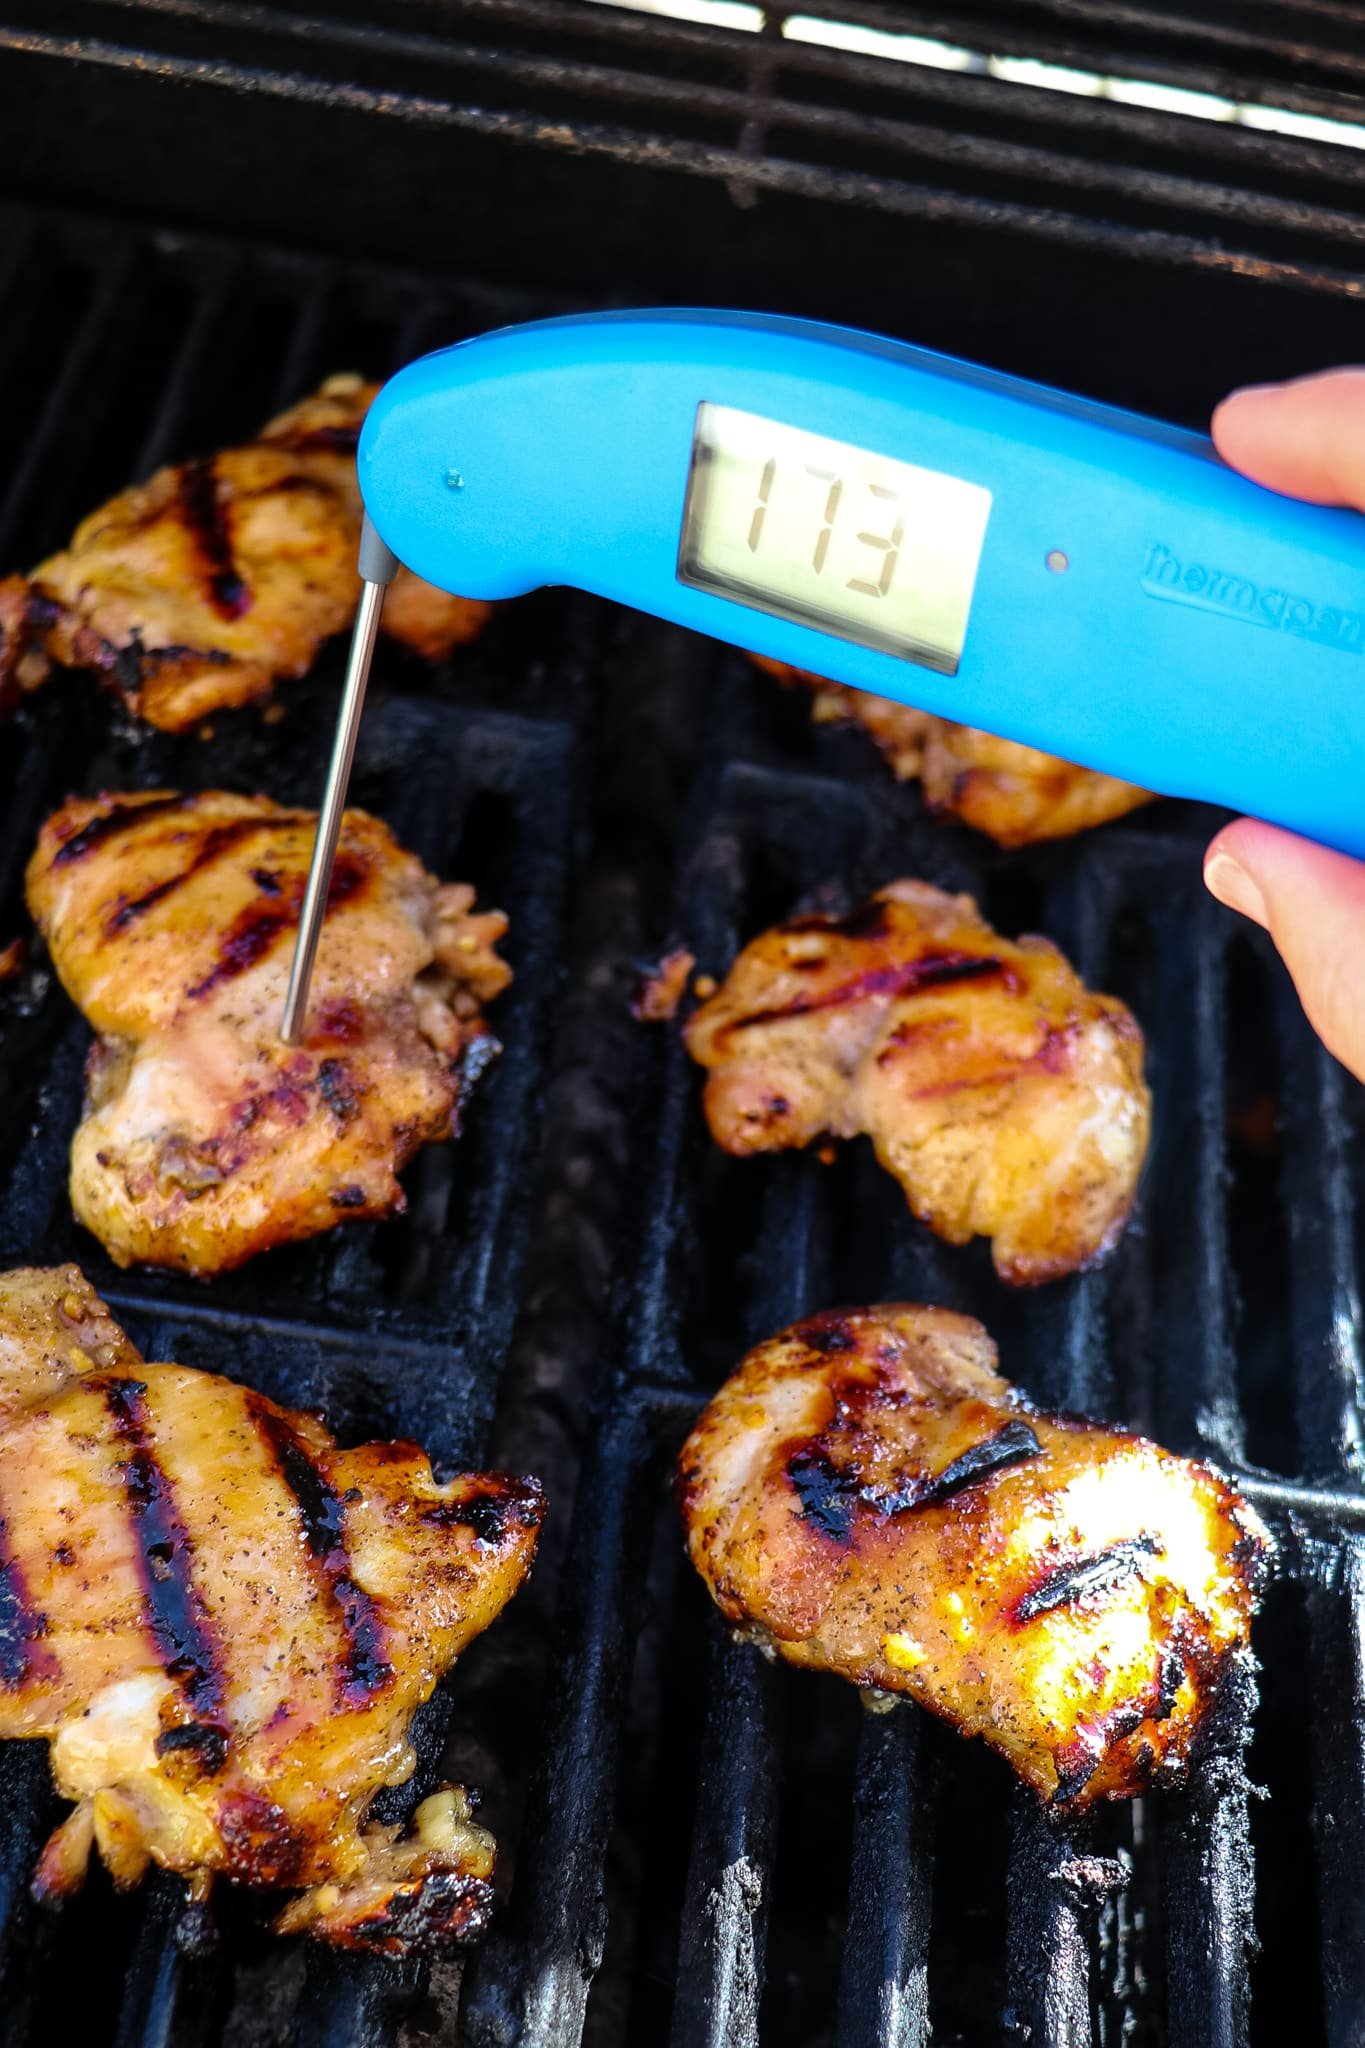 Digital thermometer taking temperature of boneless chicken thighs.